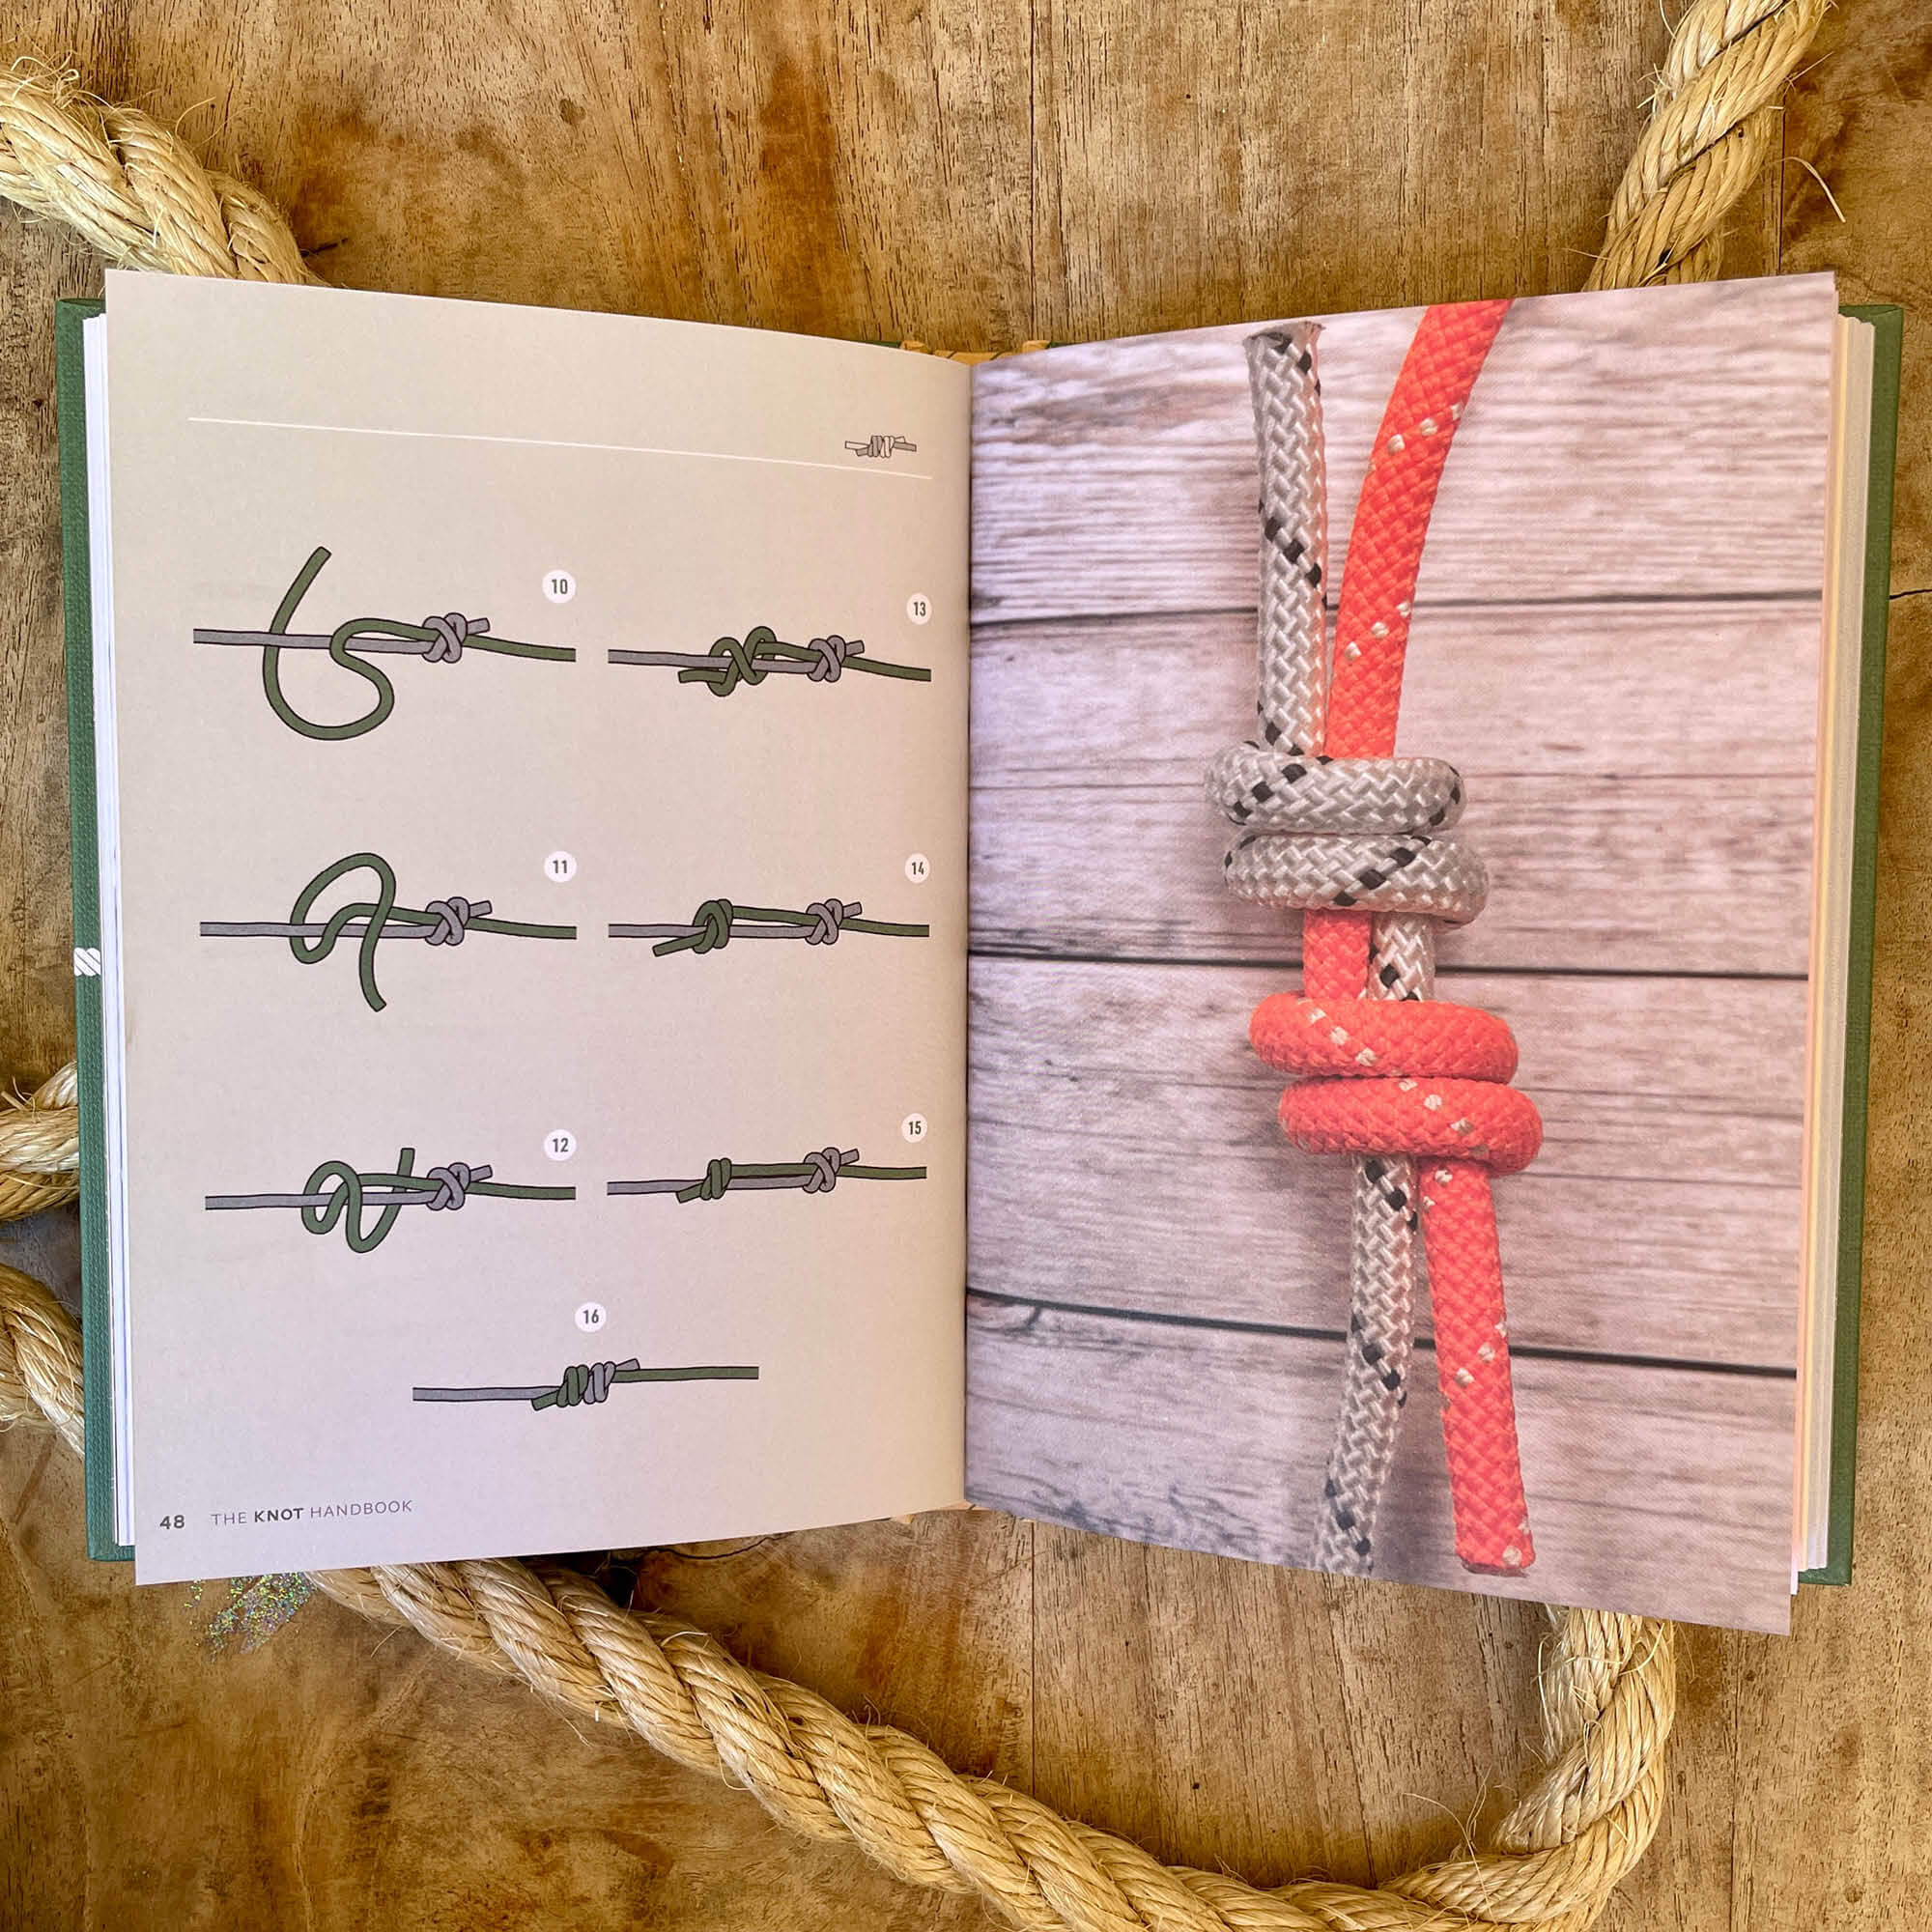 The Knot Handbook by George Lewis, 50 essential knots and their uses, part of the nature inspired range at Your Wild Books 